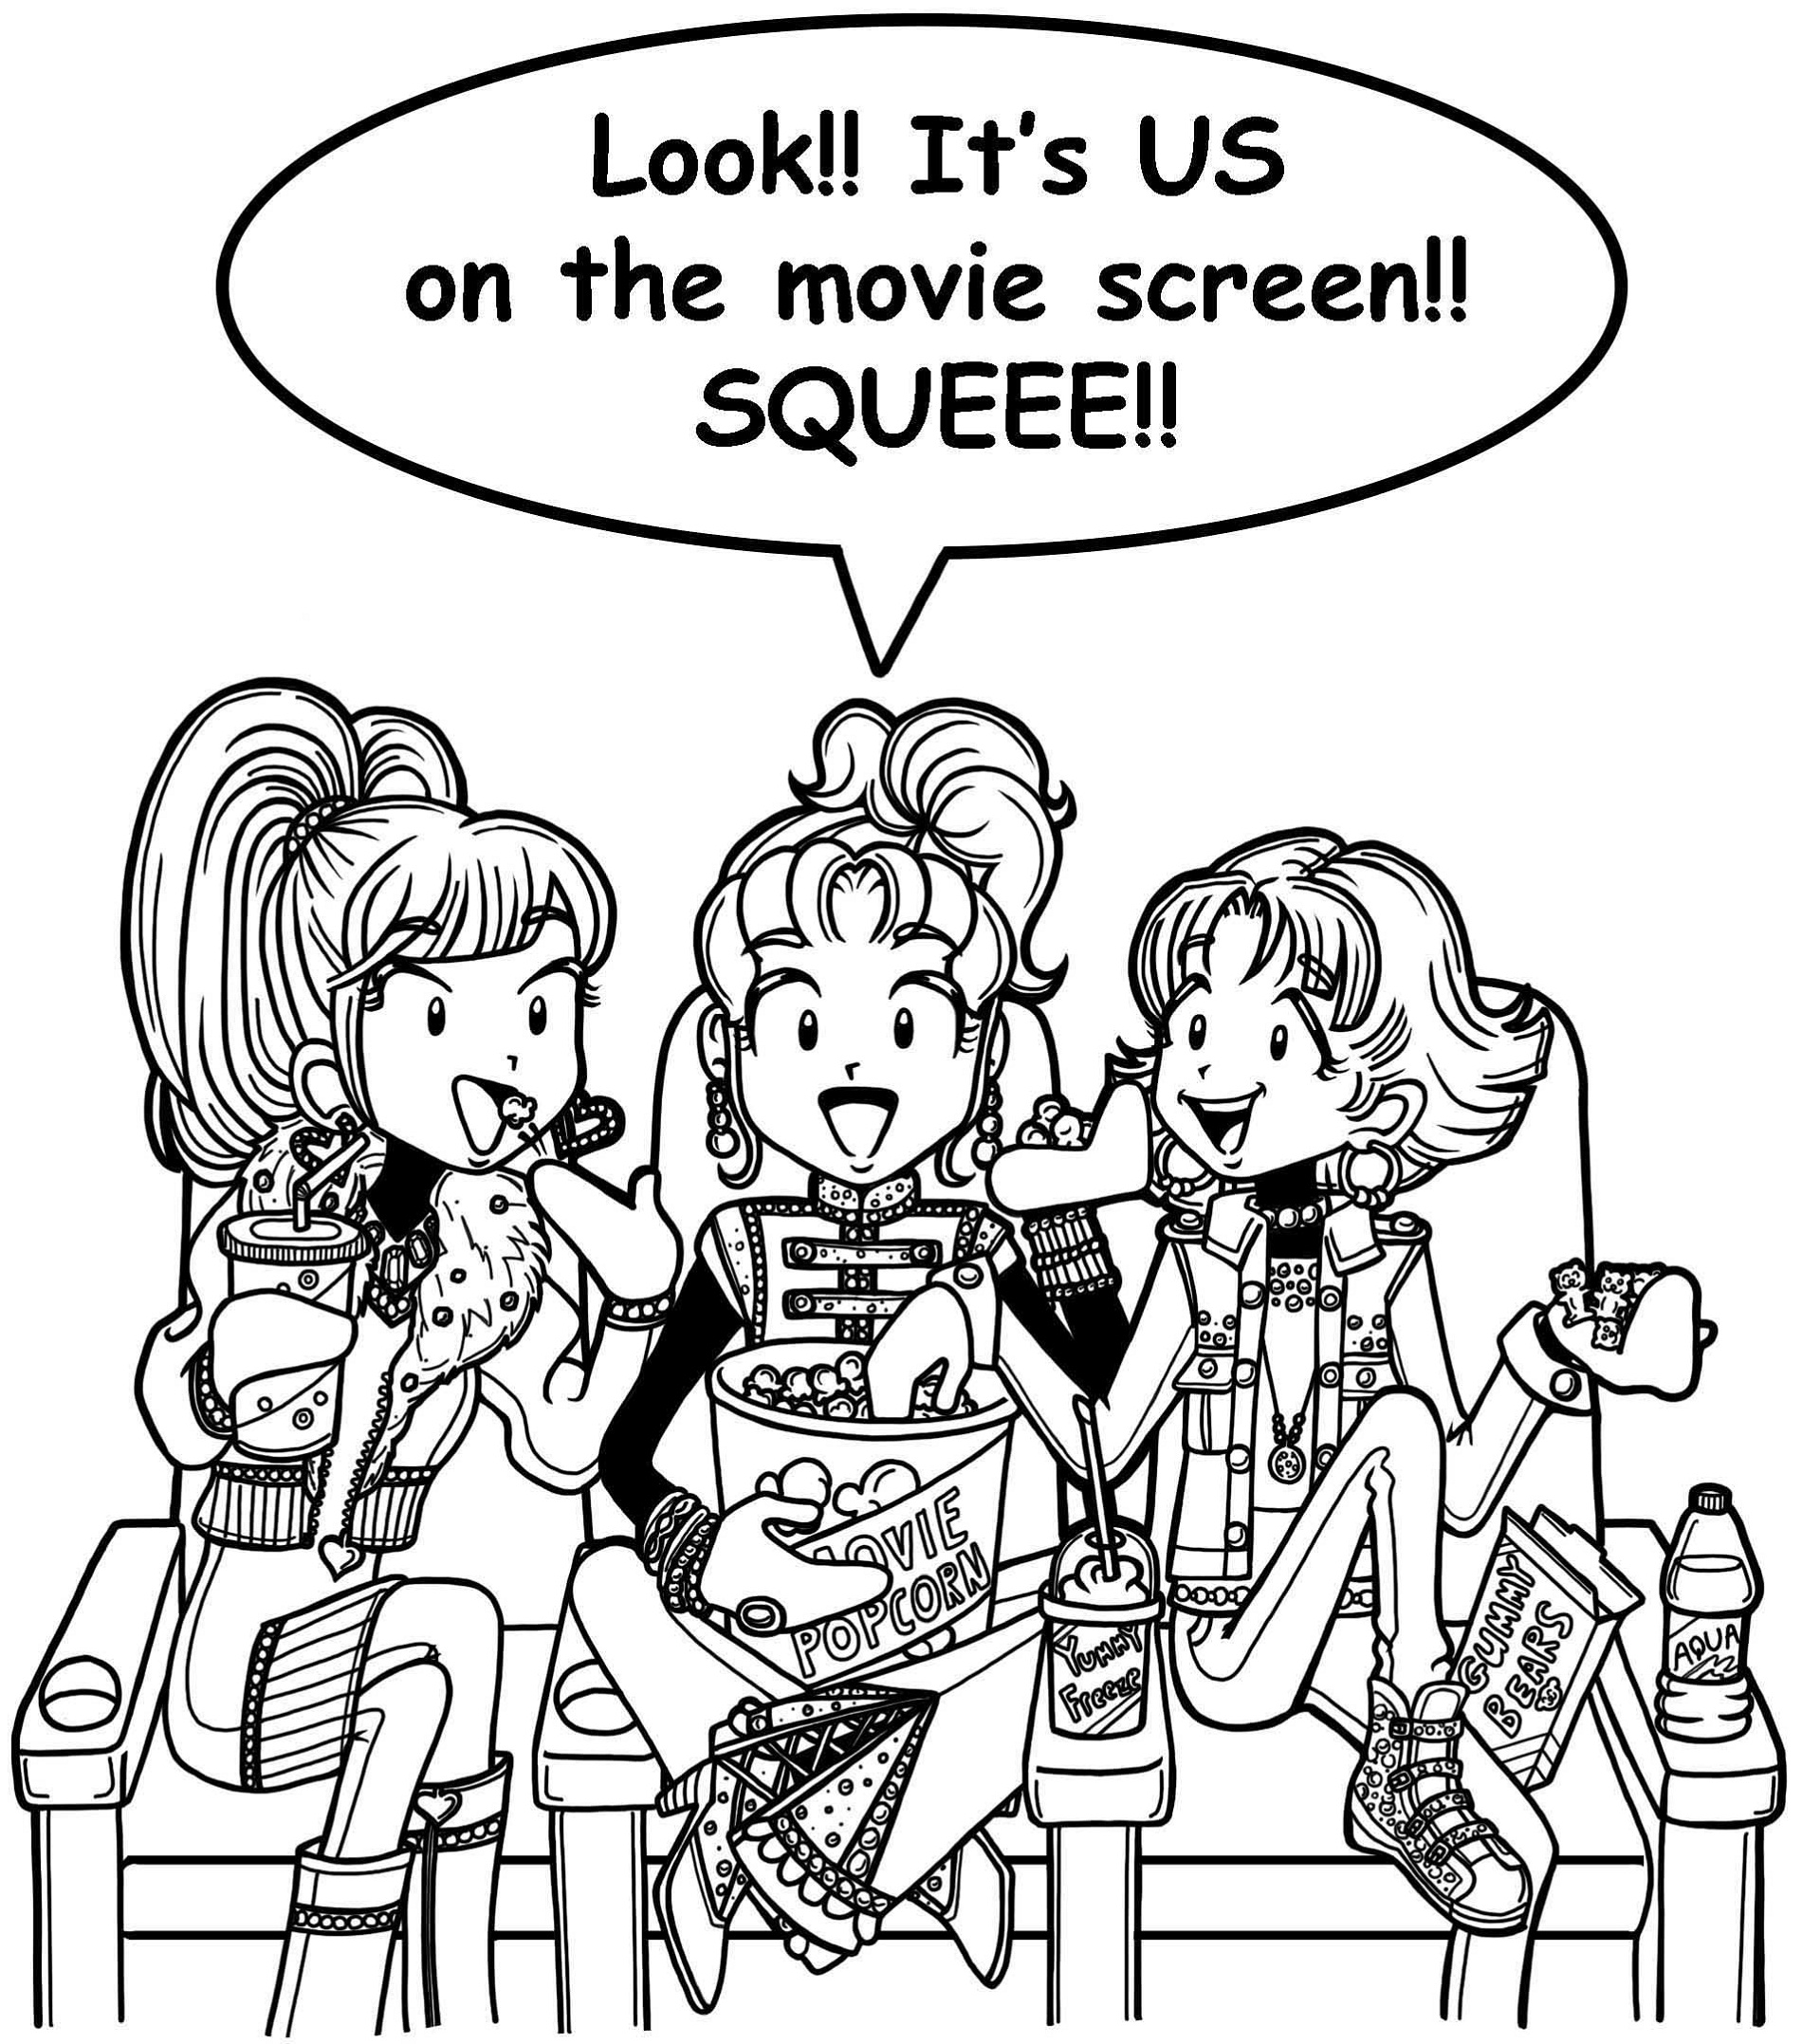 Dork Diaries Coloring Pages Bff - Dork Diaries Movie 2019 , HD Wallpaper & Backgrounds